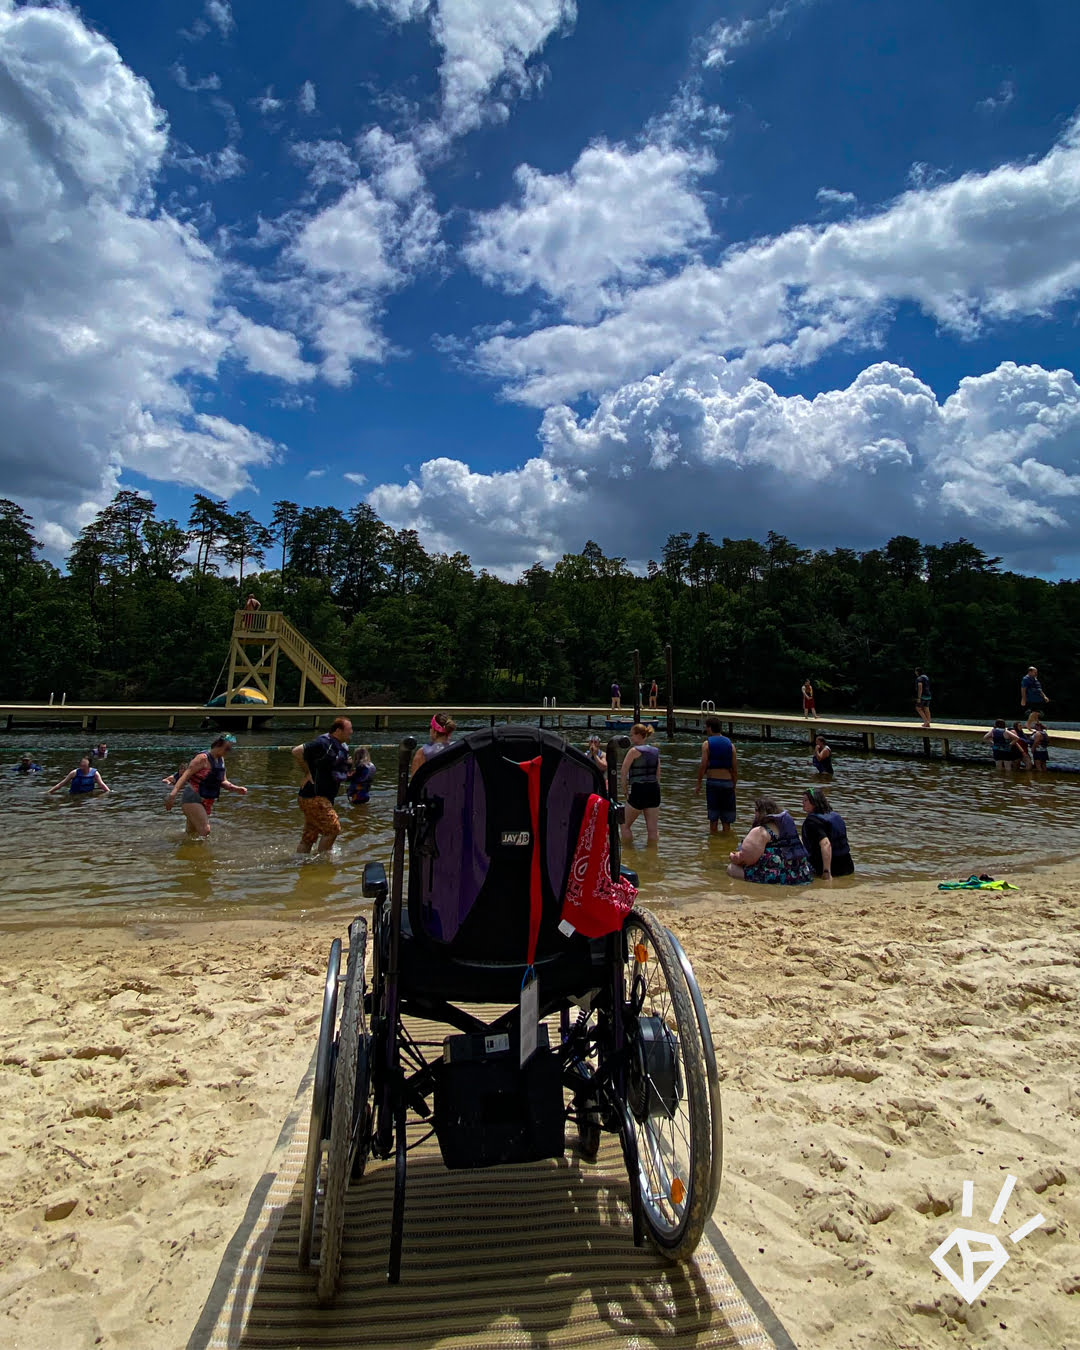 An empty wheelchair at the end of a ramp extended the length of a beach to the water.